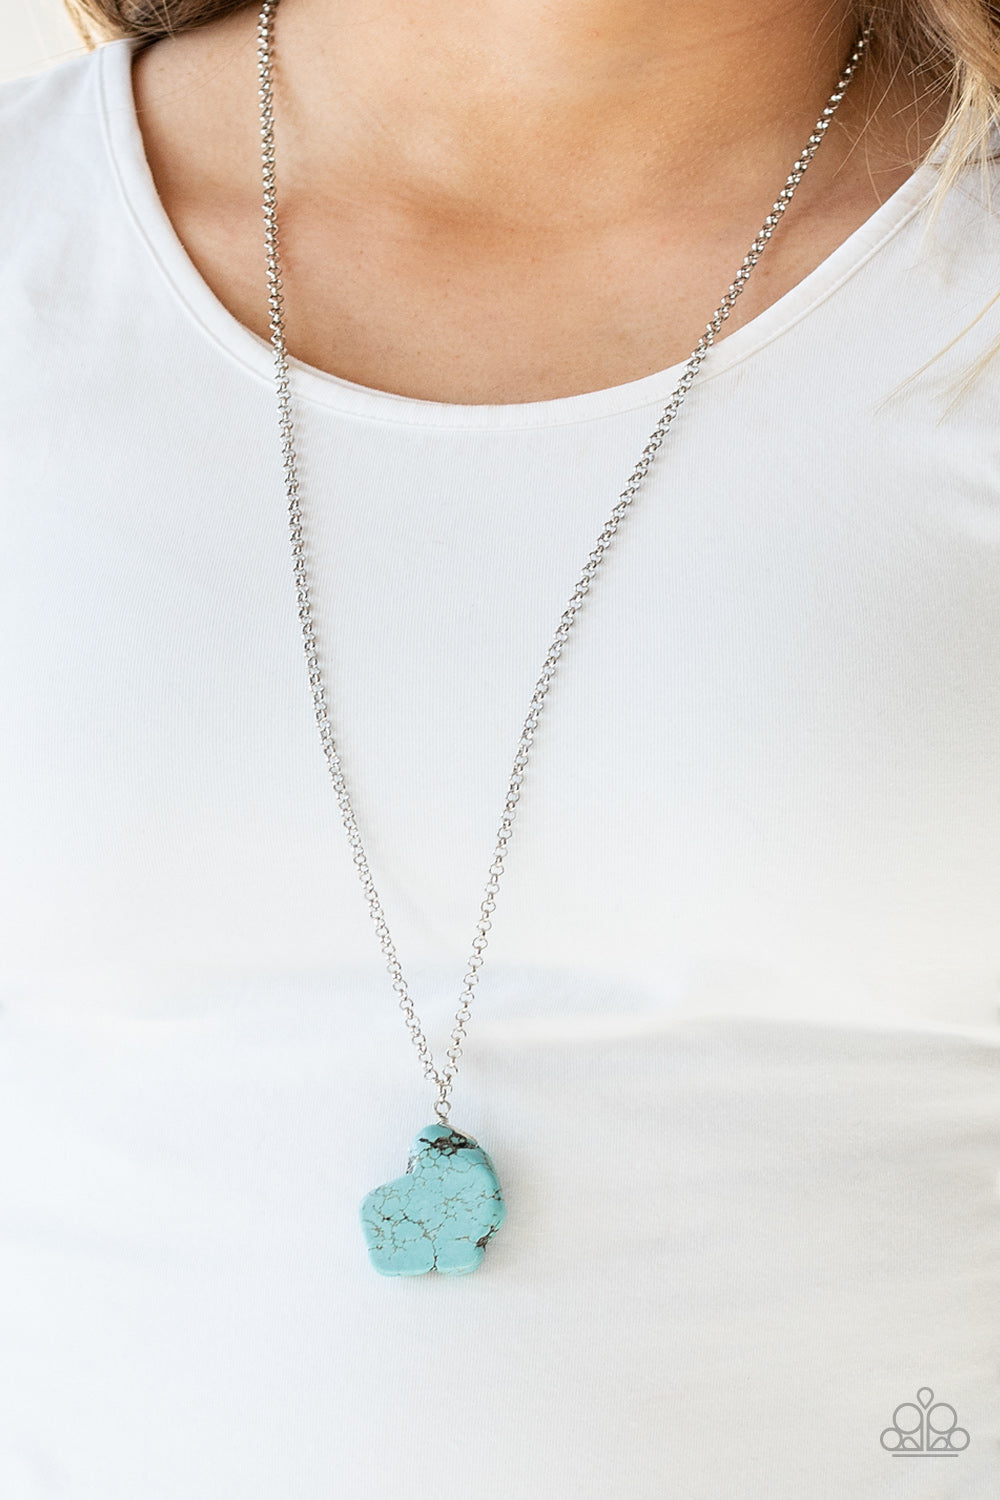 Paparazzi We Will, We Will, Rock You! - Blue - Large Turquoise Stone - Necklace & Earrings - $5 Jewelry with Ashley Swint